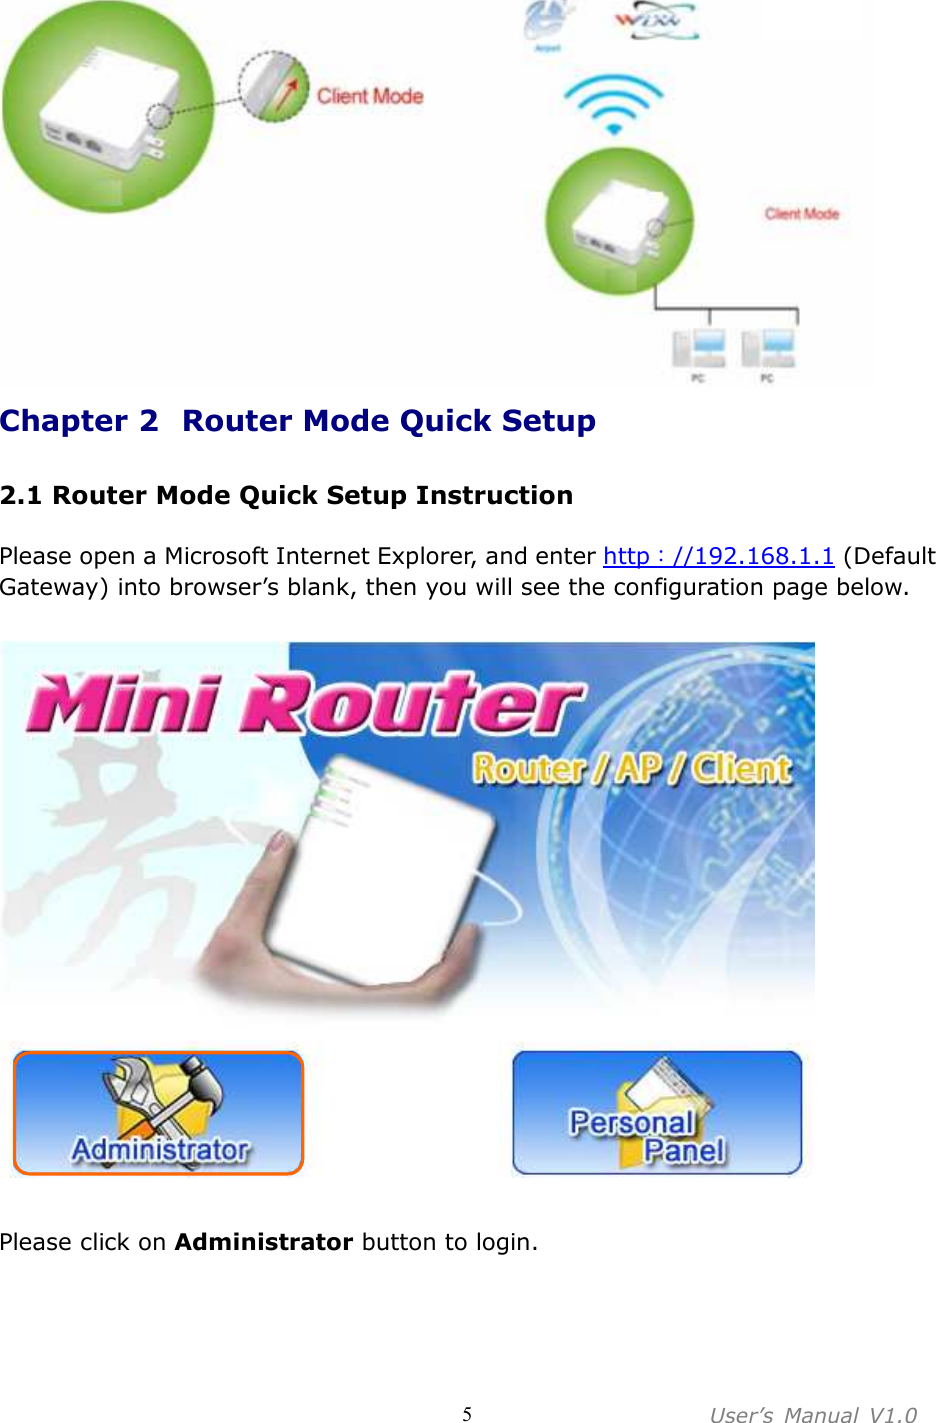 User’s  Manual  V1.0  5  Chapter 2   Router Mode Quick Setup  2.1 Router Mode Quick Setup Instruction  Please open a Microsoft Internet Explorer, and enter http：//192.168.1.1 (Default Gateway) into browser’s blank, then you will see the configuration page below.    Please click on Administrator button to login. 